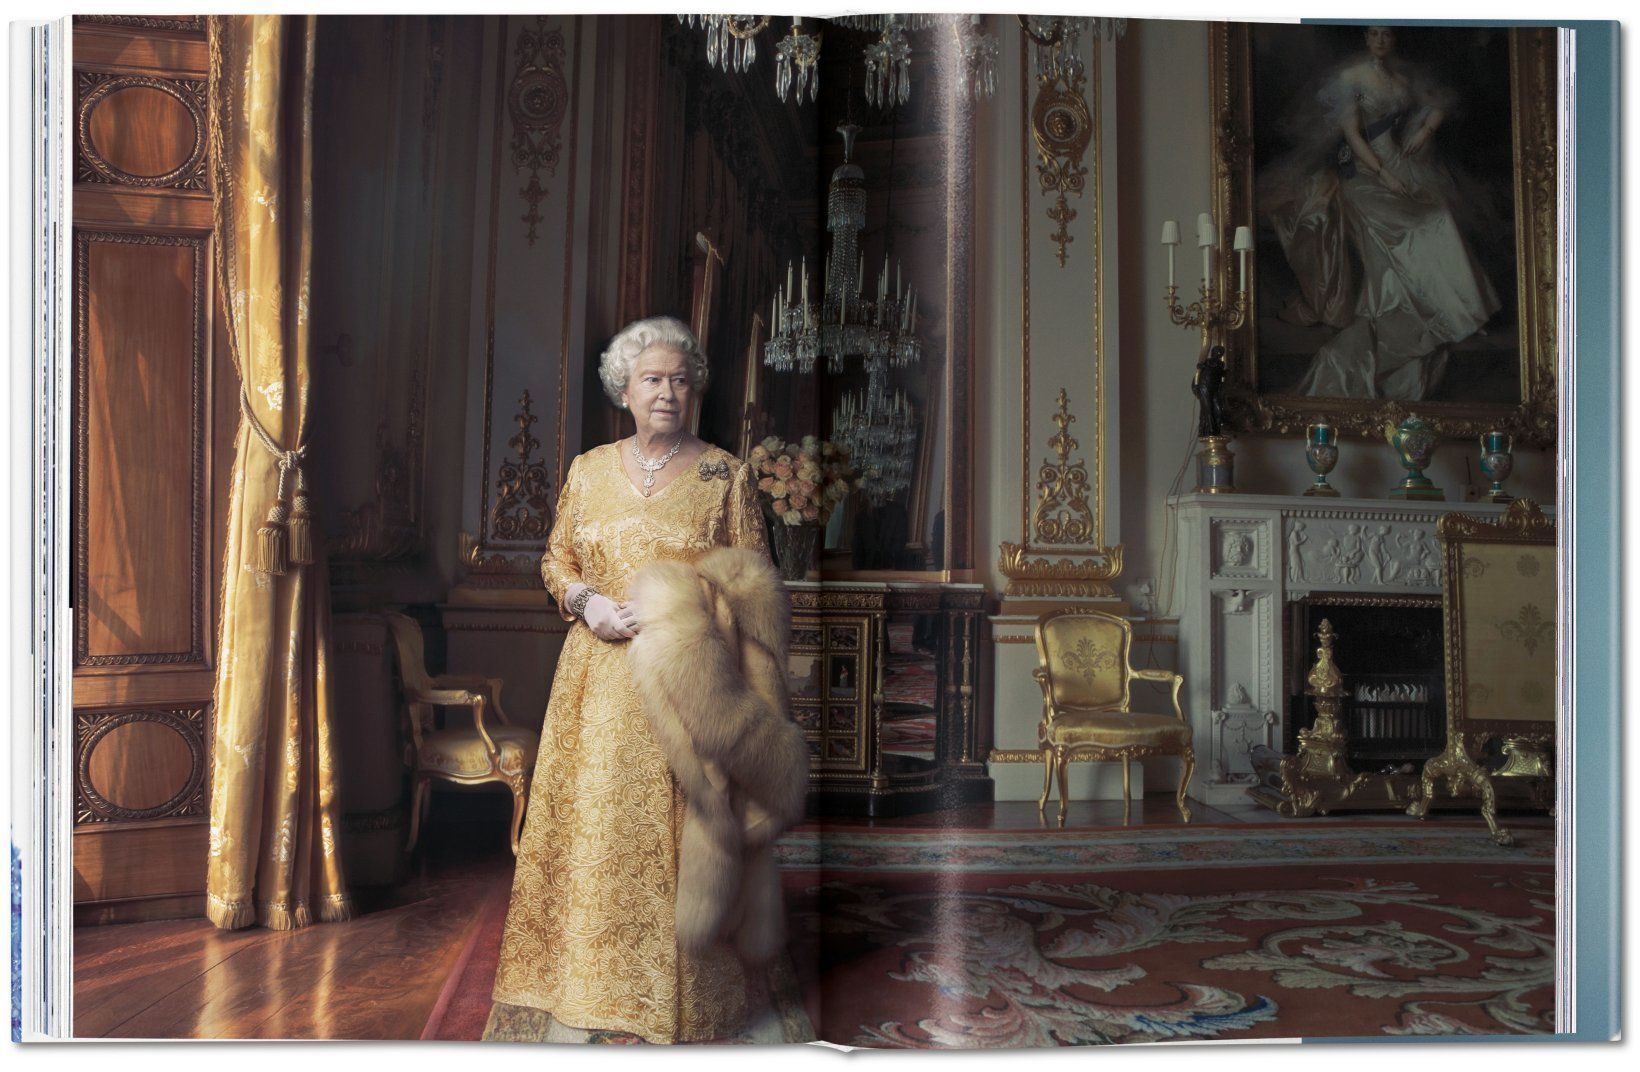  Her Majesty. A Photographic History 1926-Today_Christopher Warwick_9783836584685_Taschen GmbH 